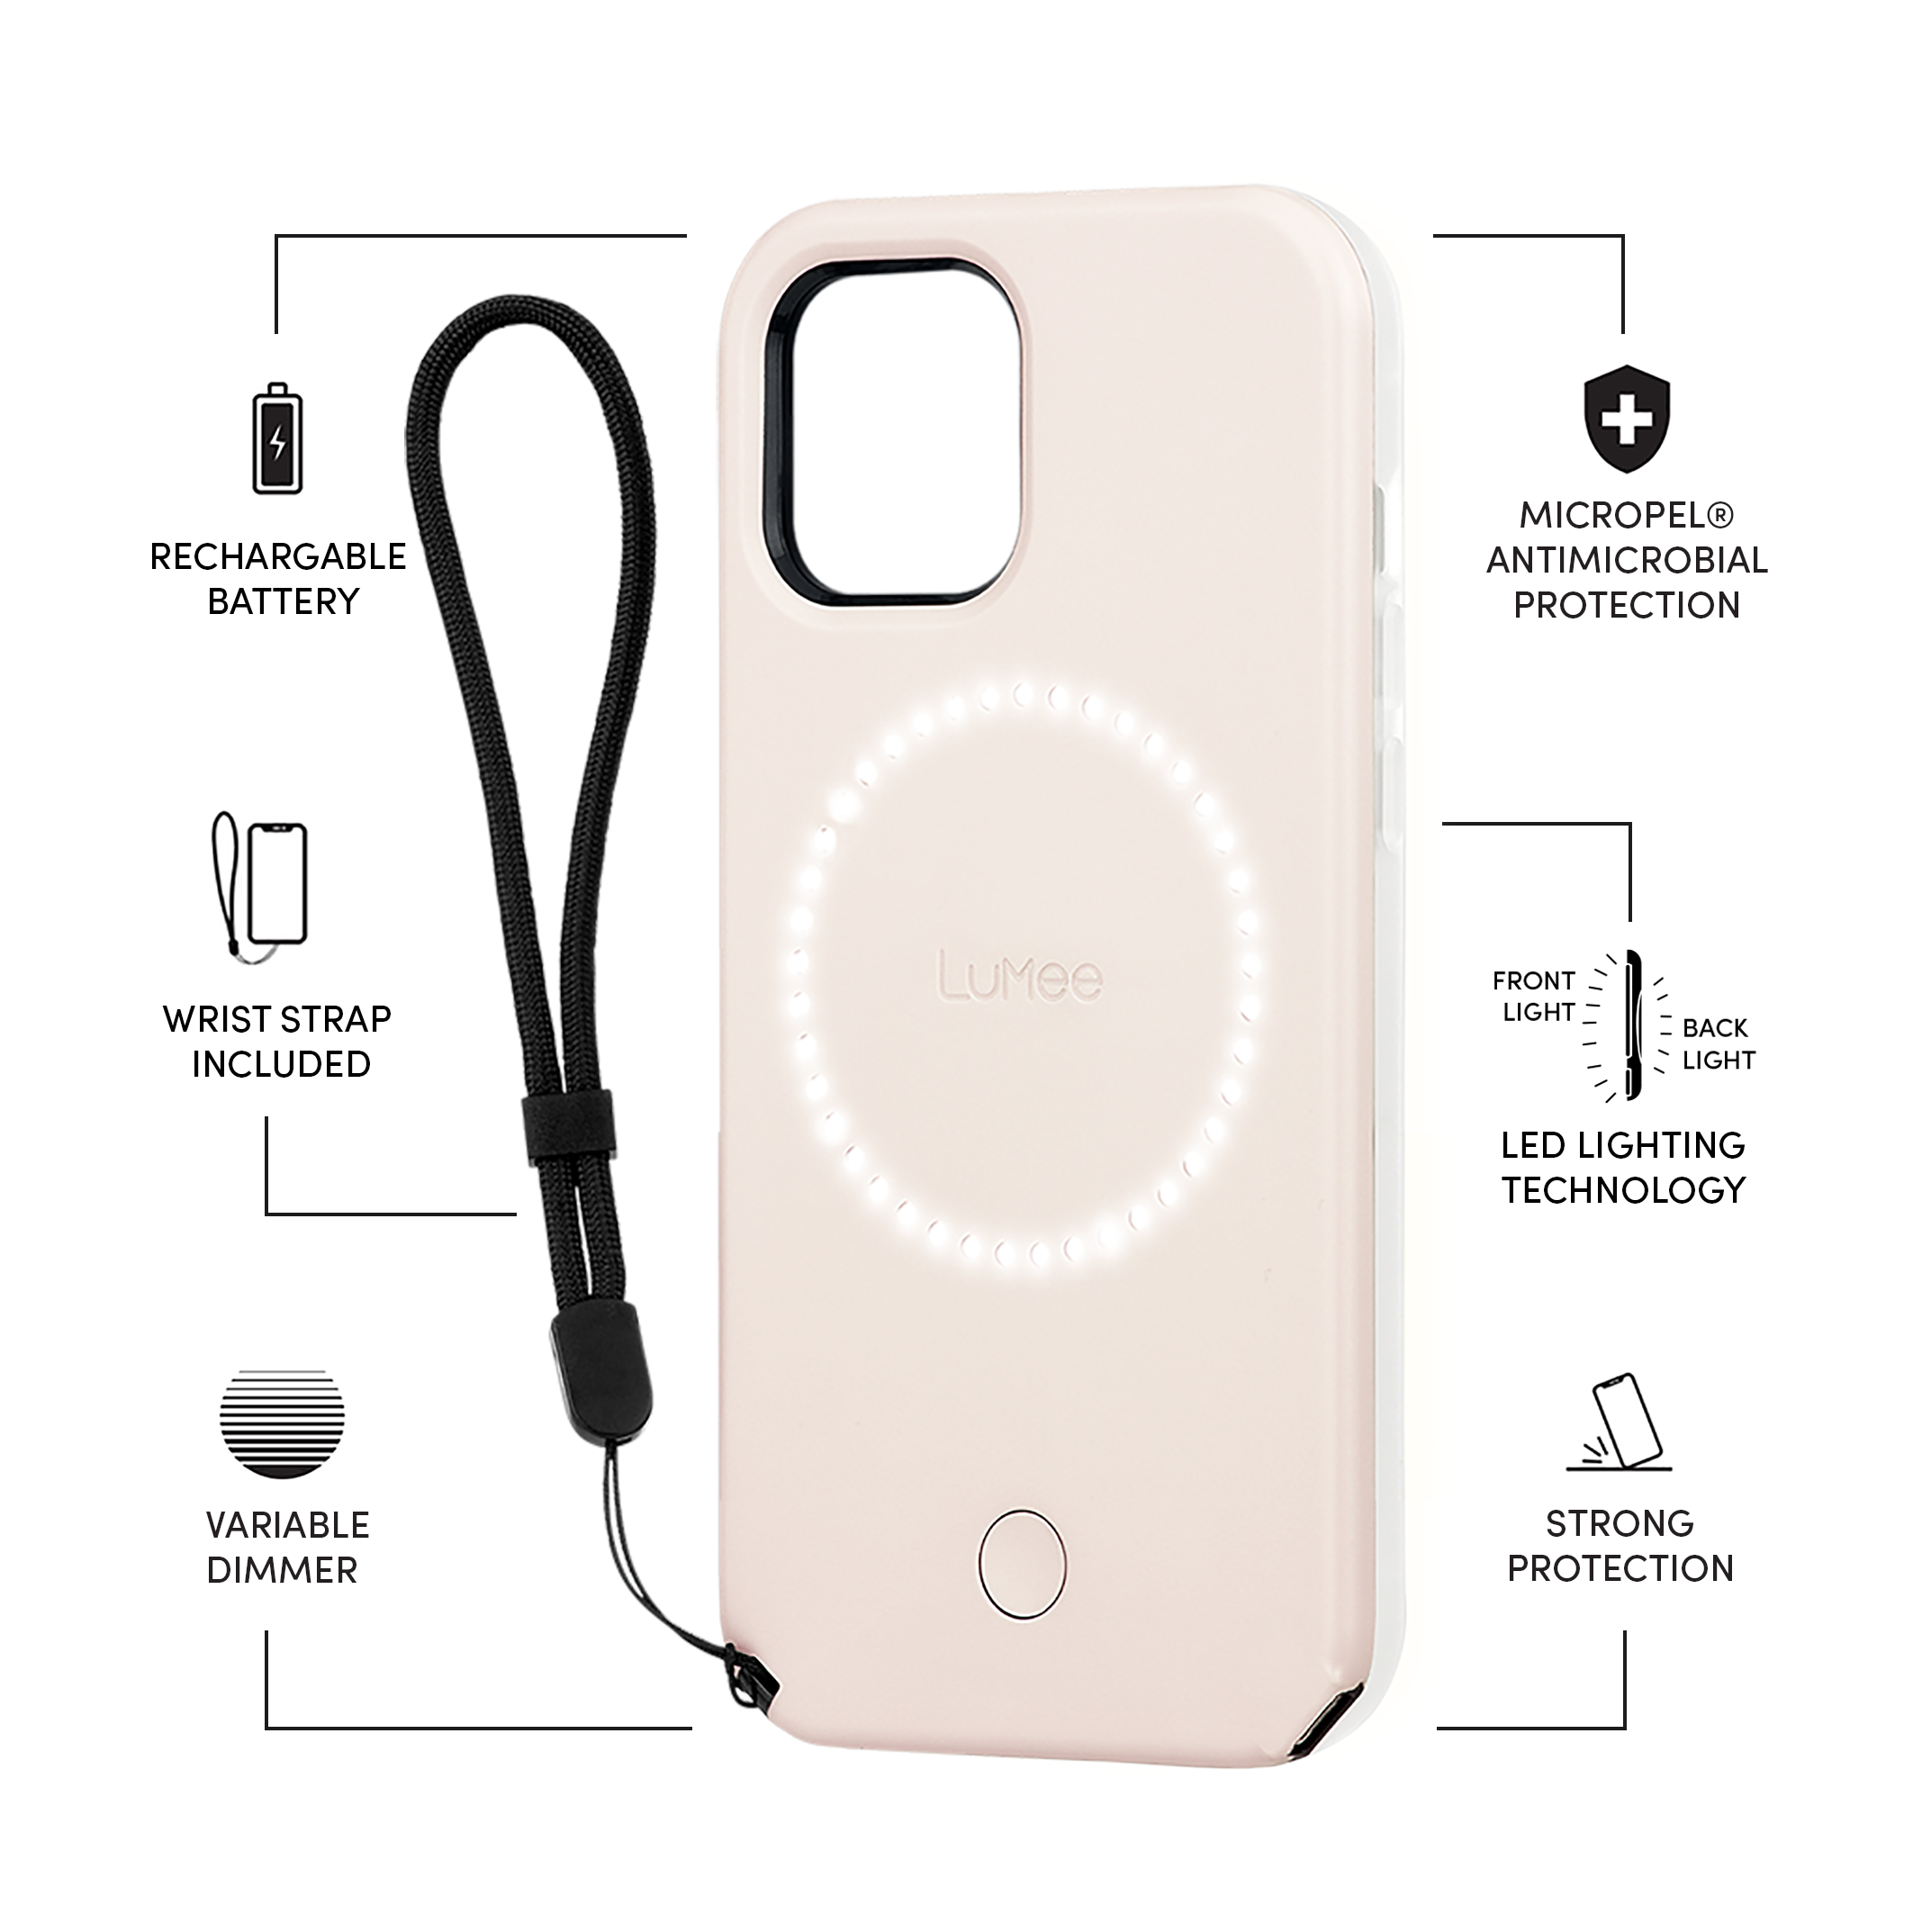 Lumee Halo Selfie Case for Apple iPhone 12 Pro Max - Studio-Like Front & Back Light w/ Variable Dimmer & Micropel AntiBacterial Protection Wireless Pass-Through Charging - Millenial Pink